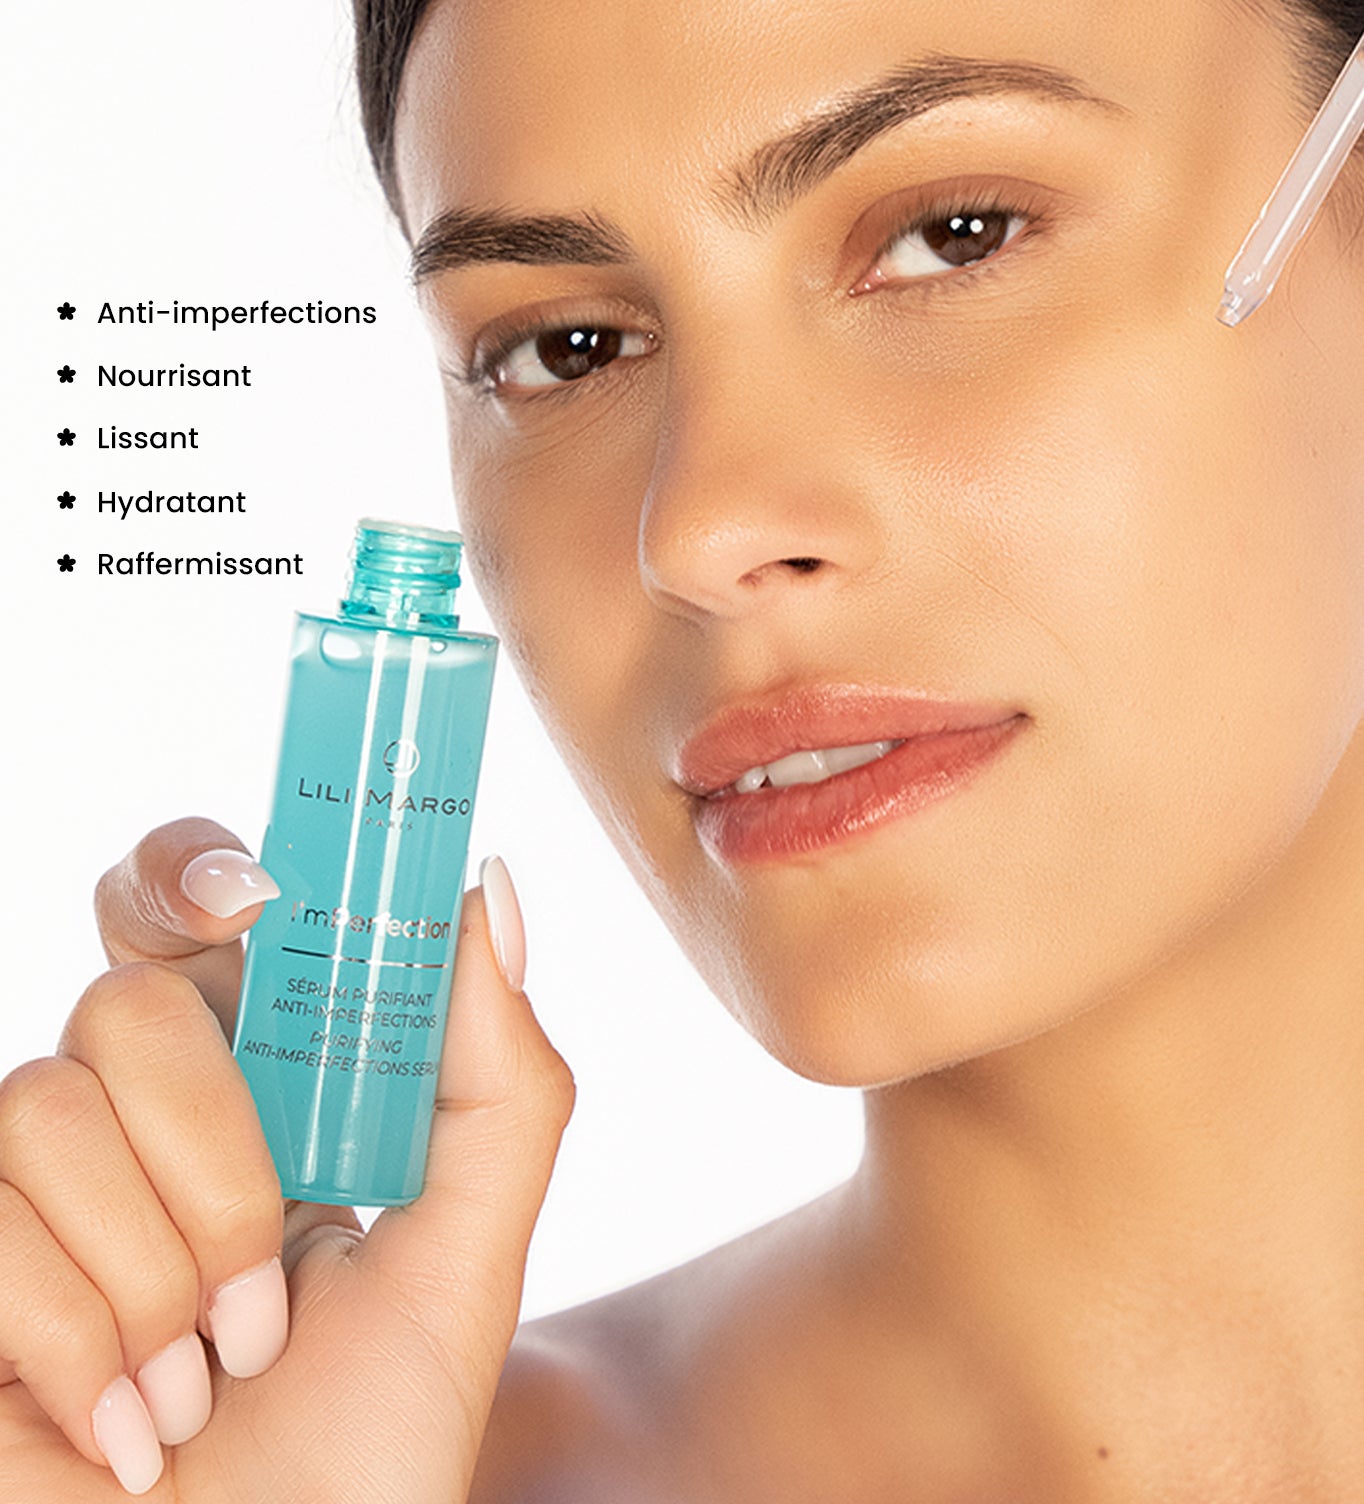 Purifying Anti-Imperfections Serum